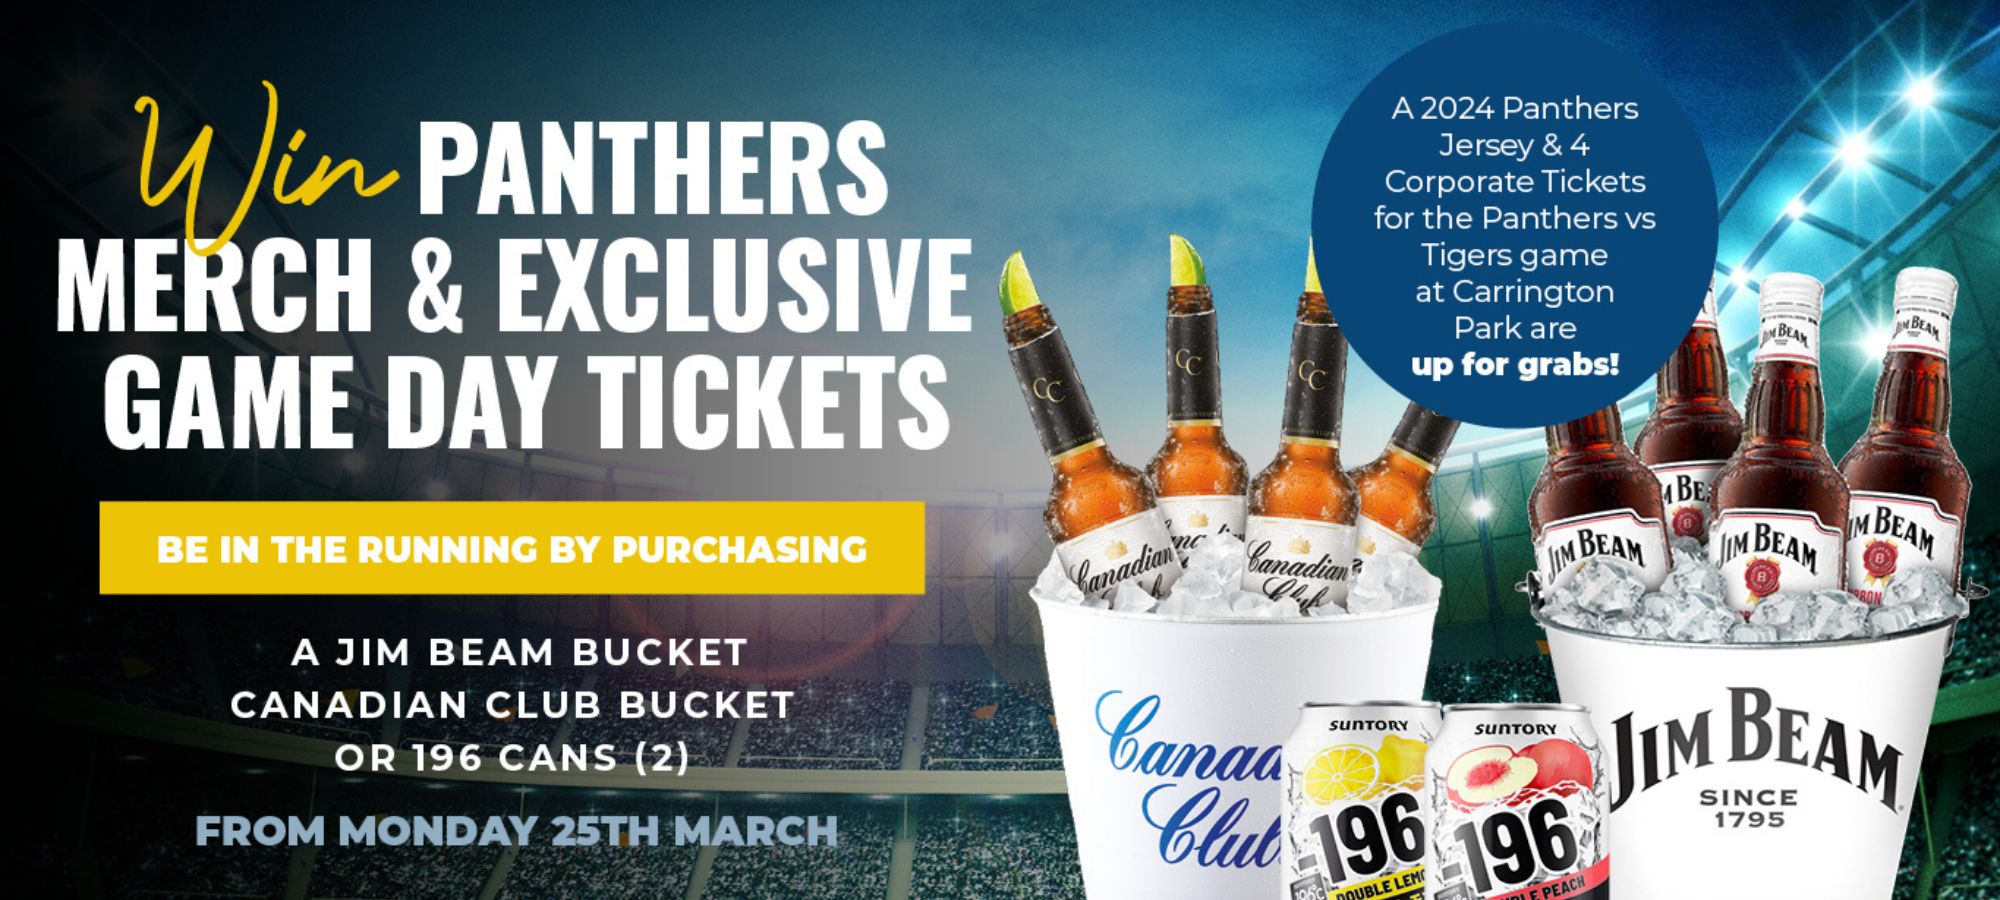 Win Panthers Merch & Exclusive Tickets!